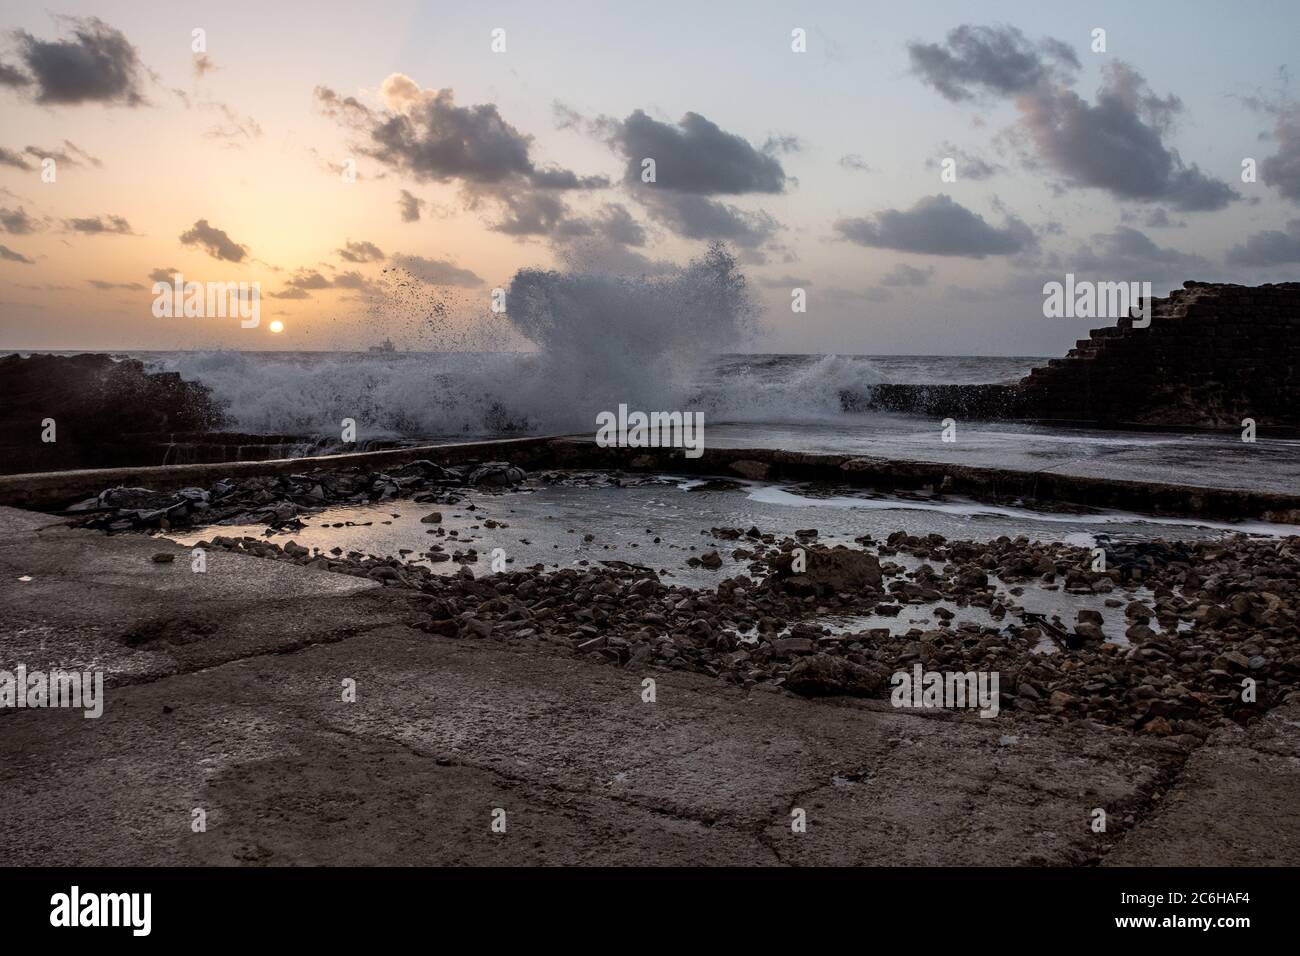 The ancient port of Caesarea, Israel at Sunset. Waves are breaking on the breakwater Stock Photo